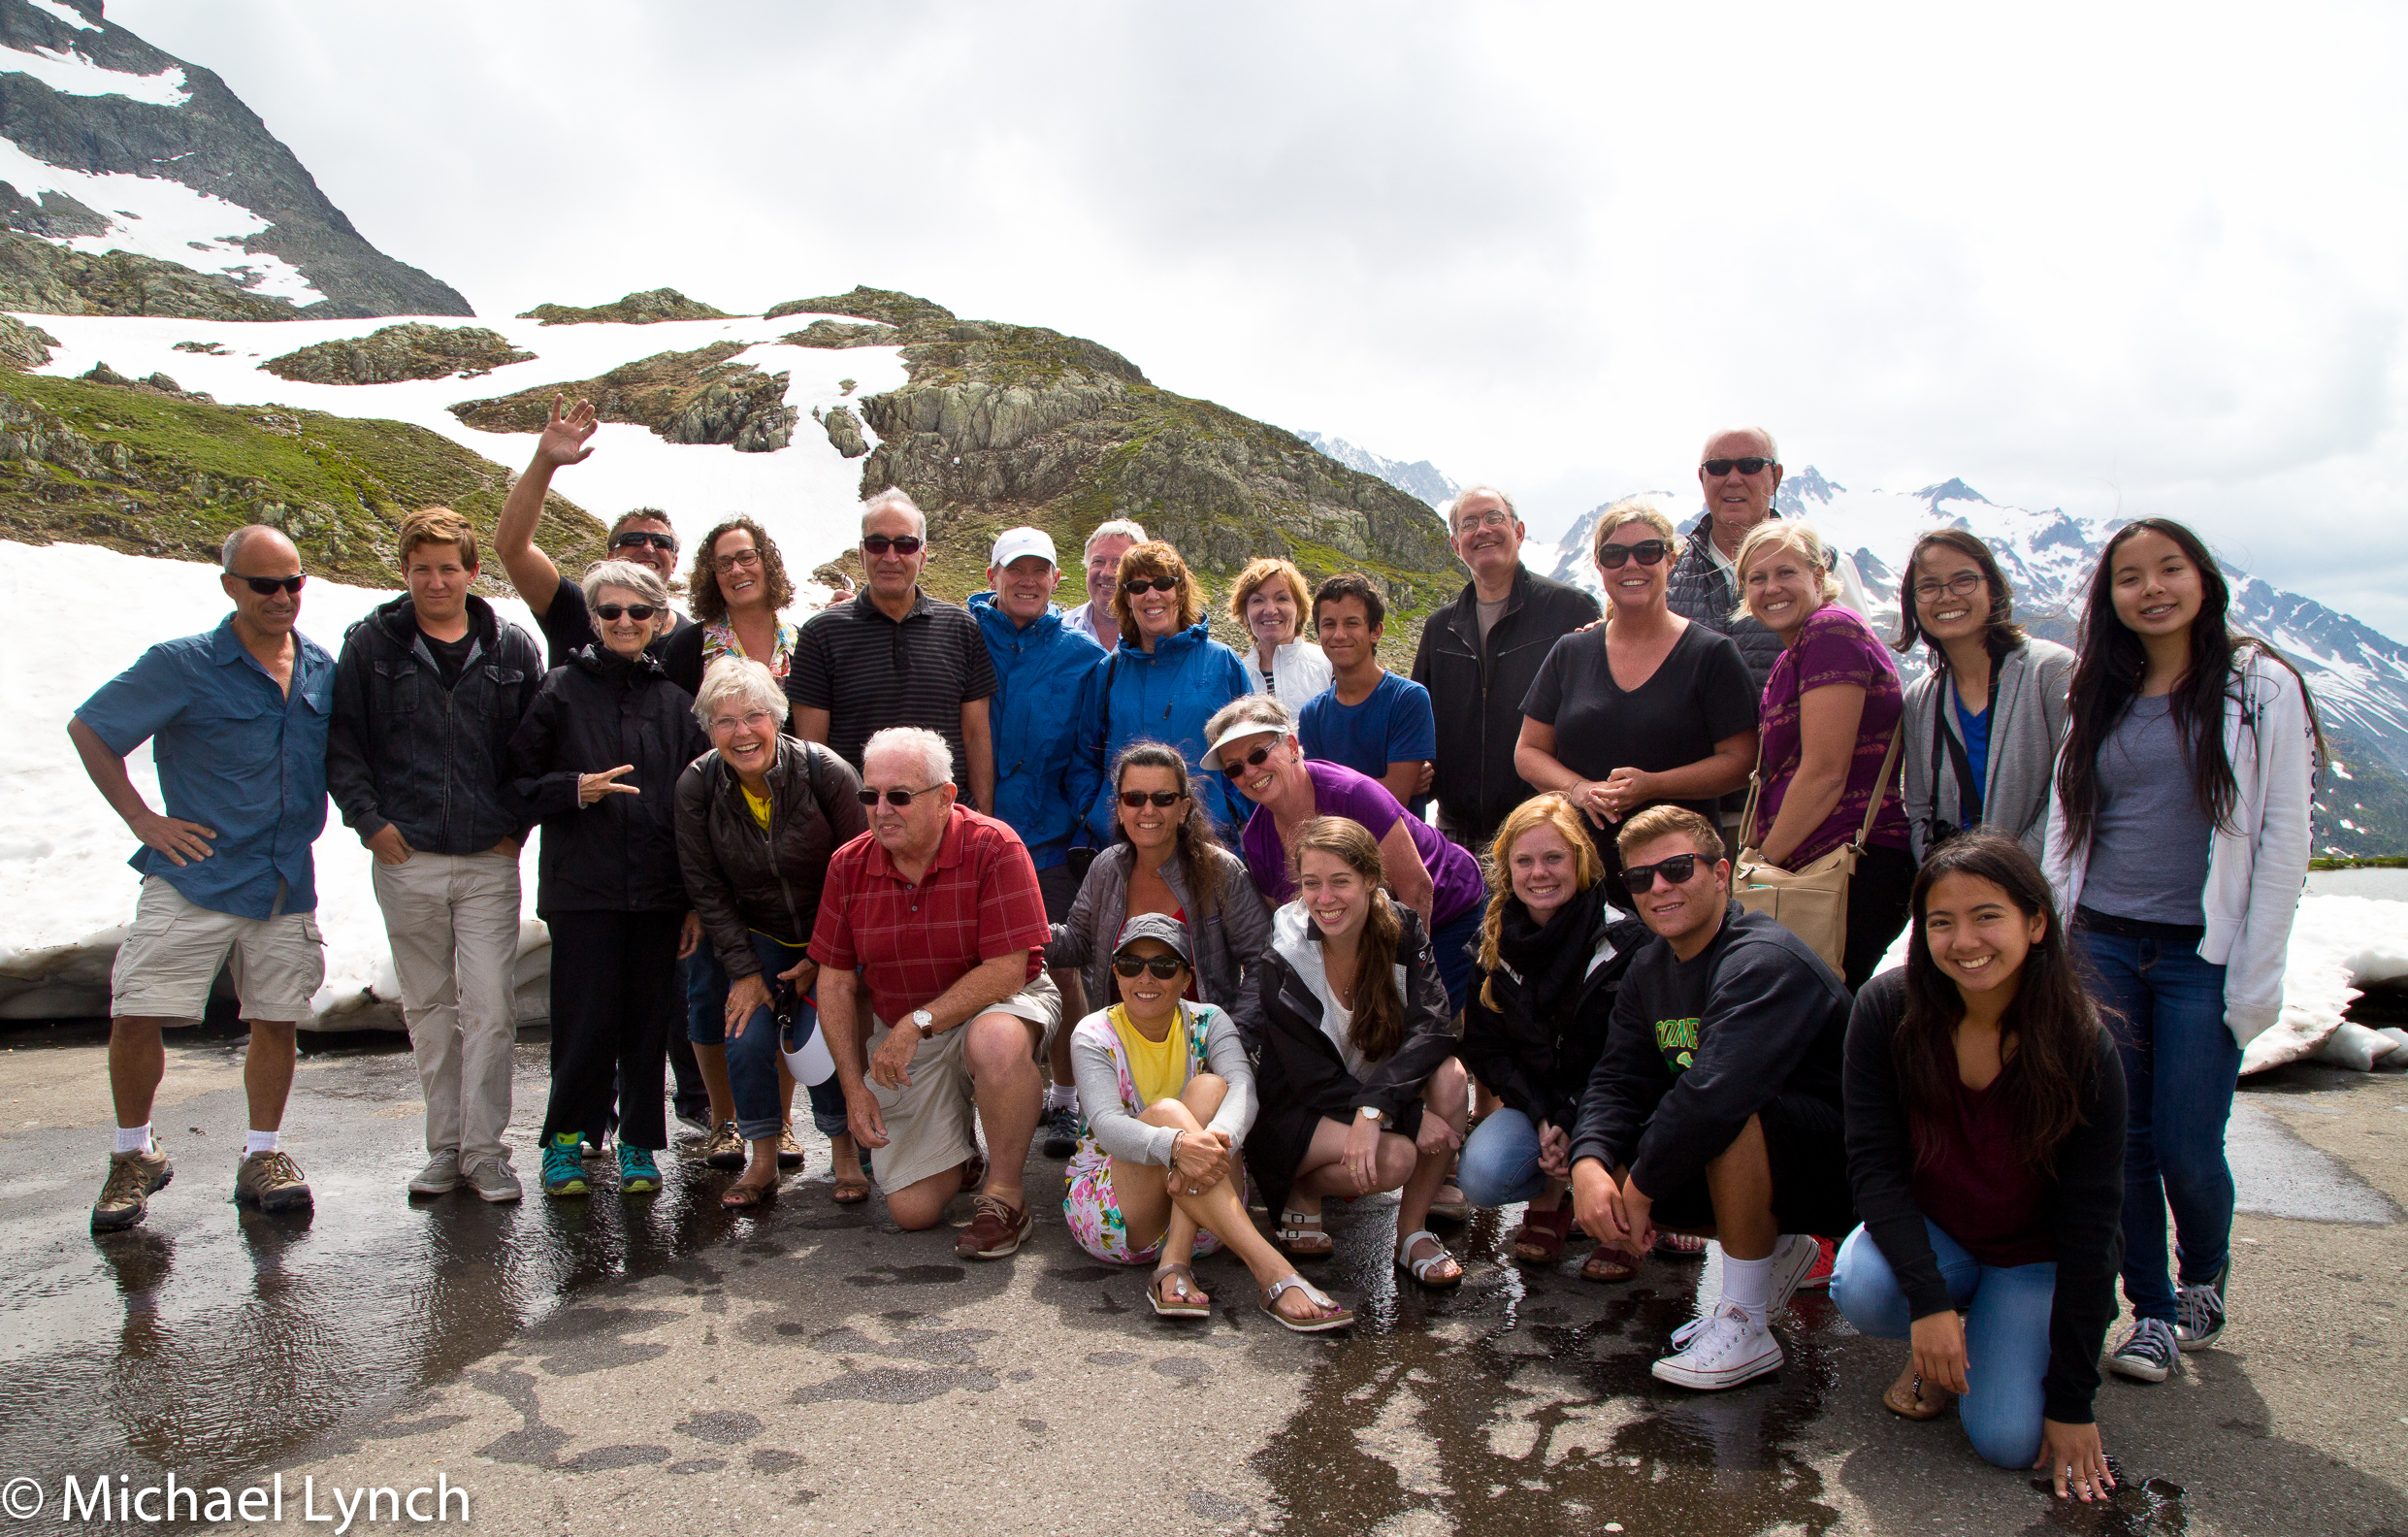 Tour Group at Swiss Alps Rest Stop